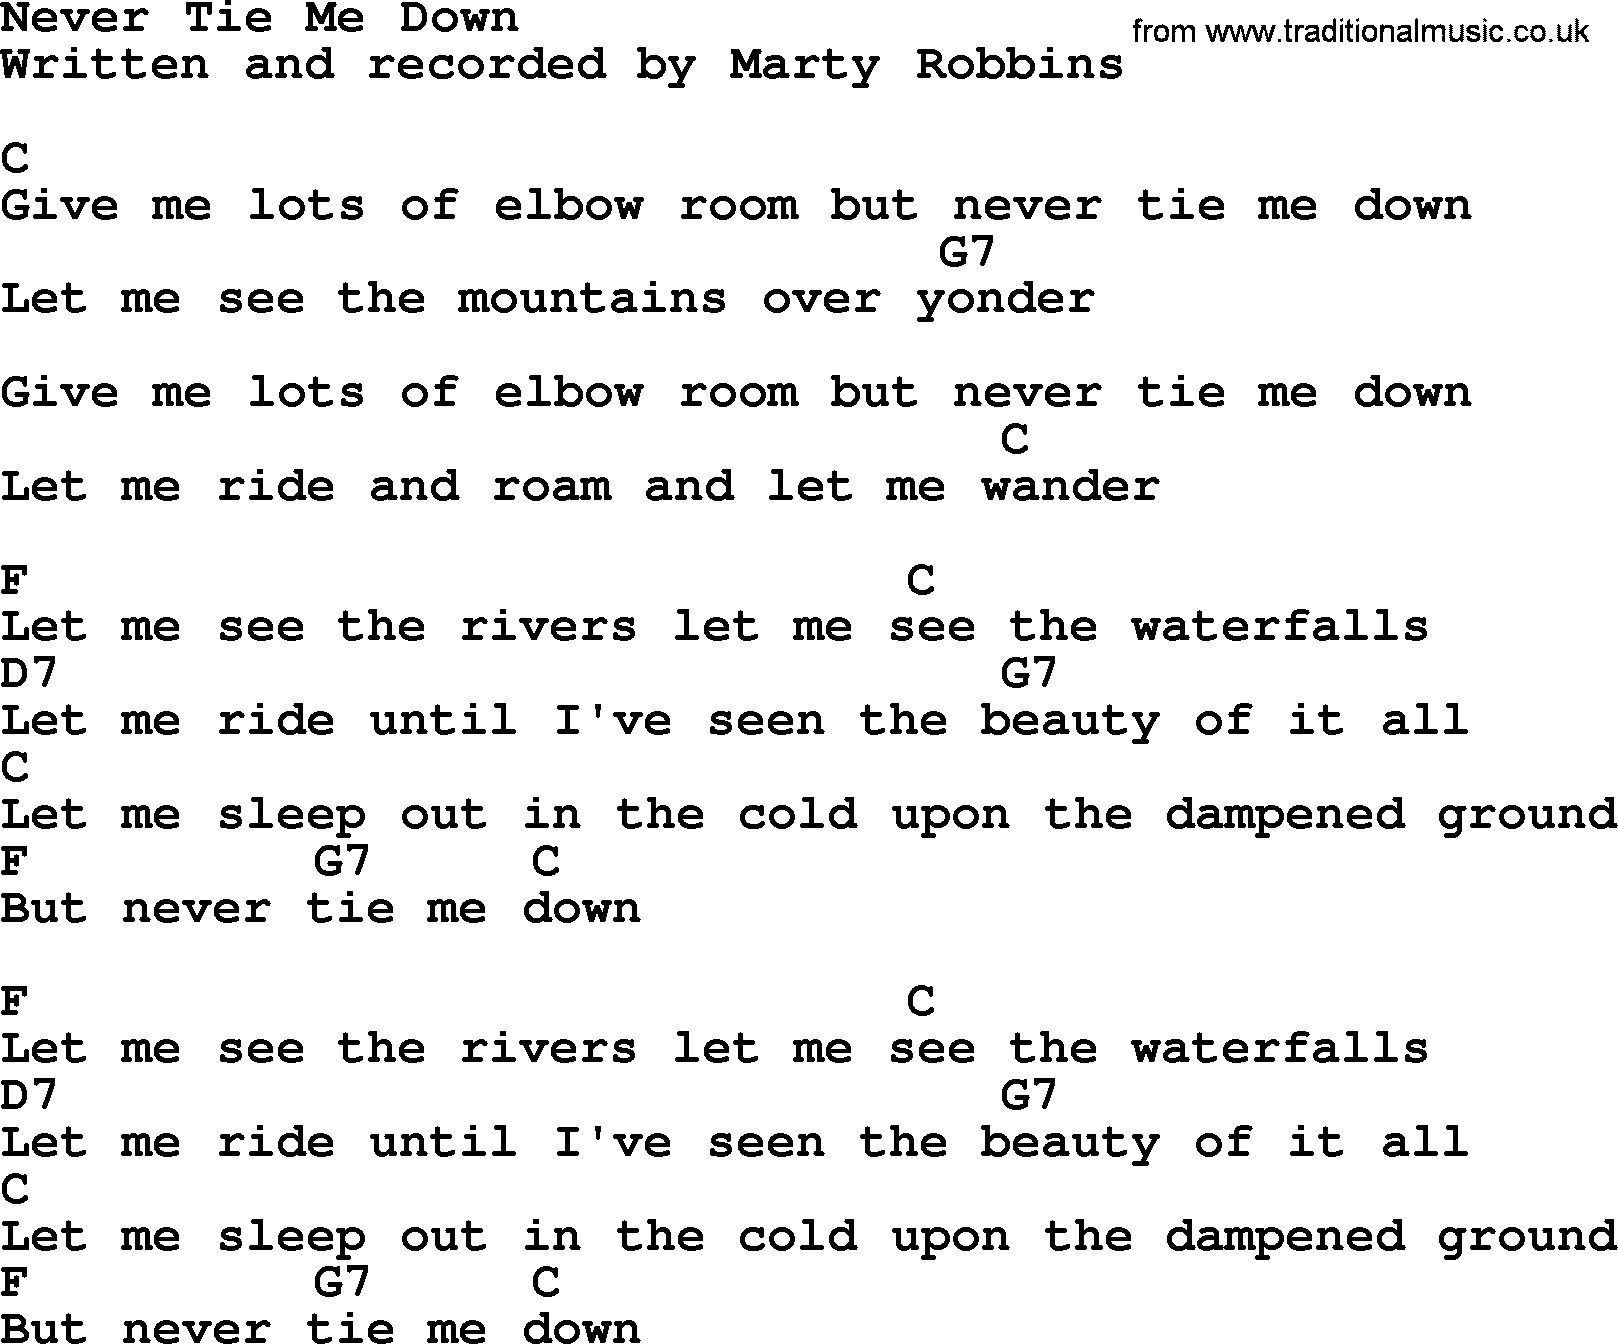 Marty Robbins song: Never Tie Me Down, lyrics and chords